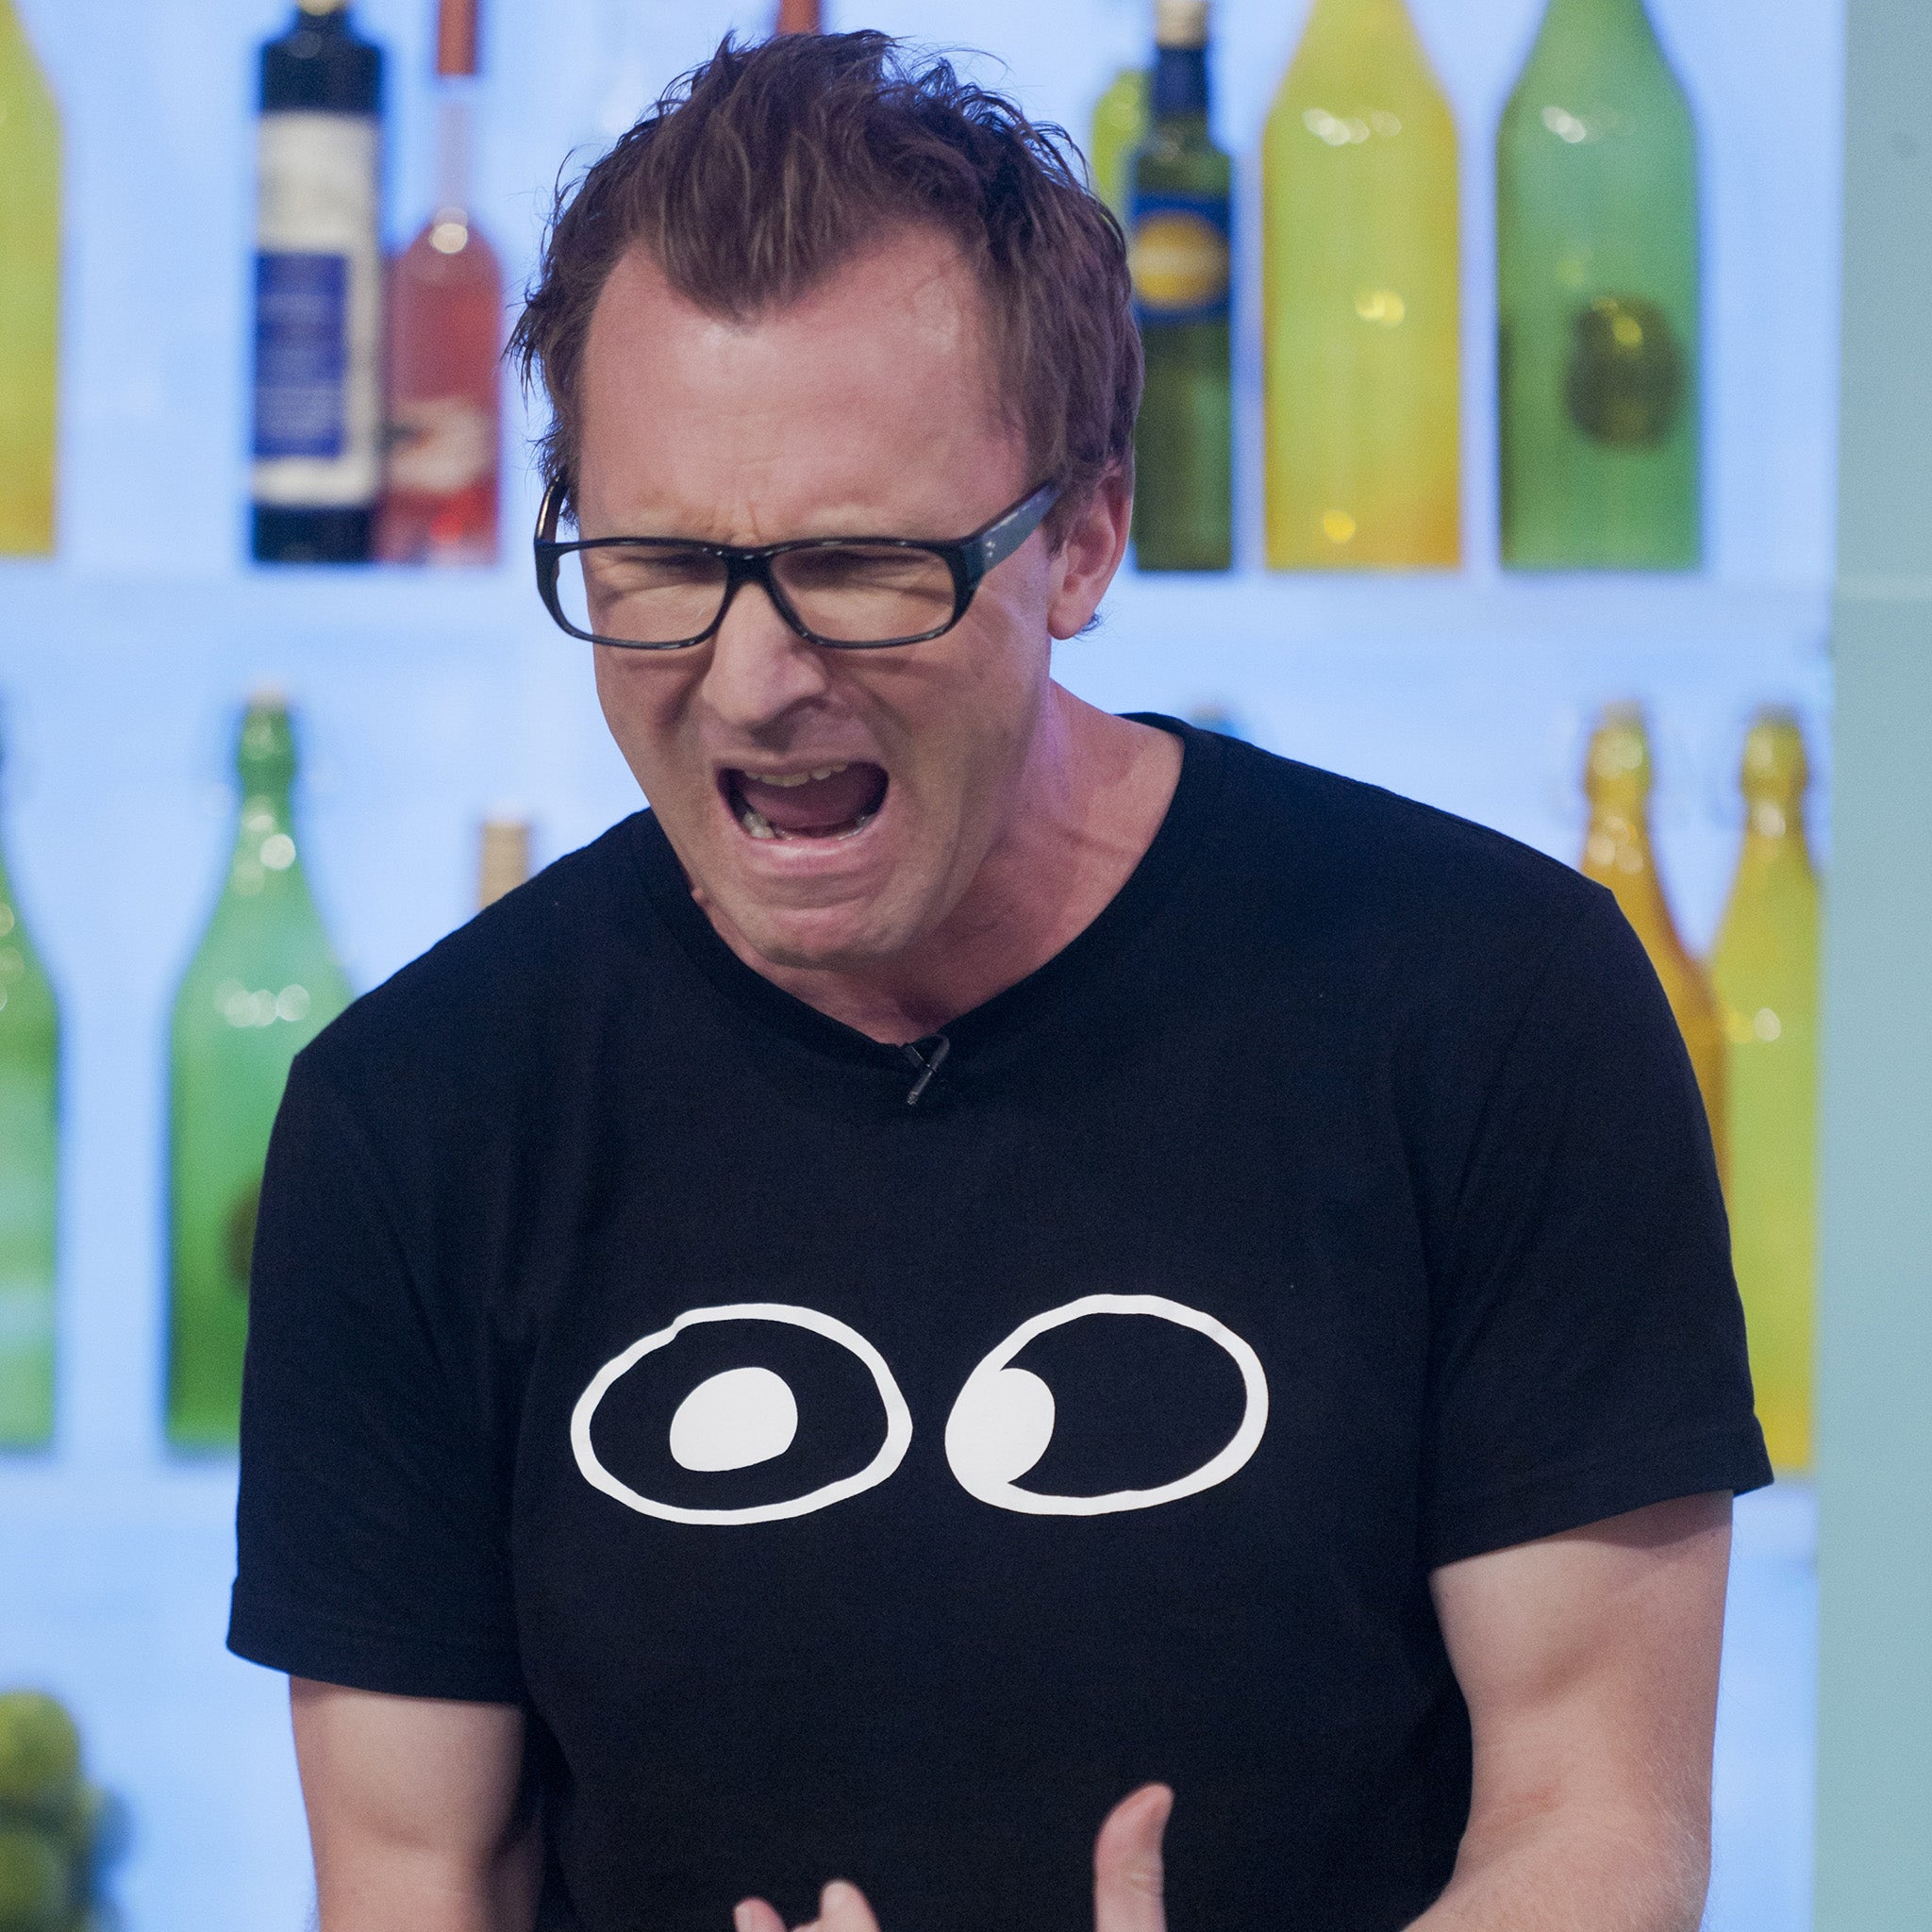 Co-presenter and challenge commentator of Wild Things, Jason Byrne